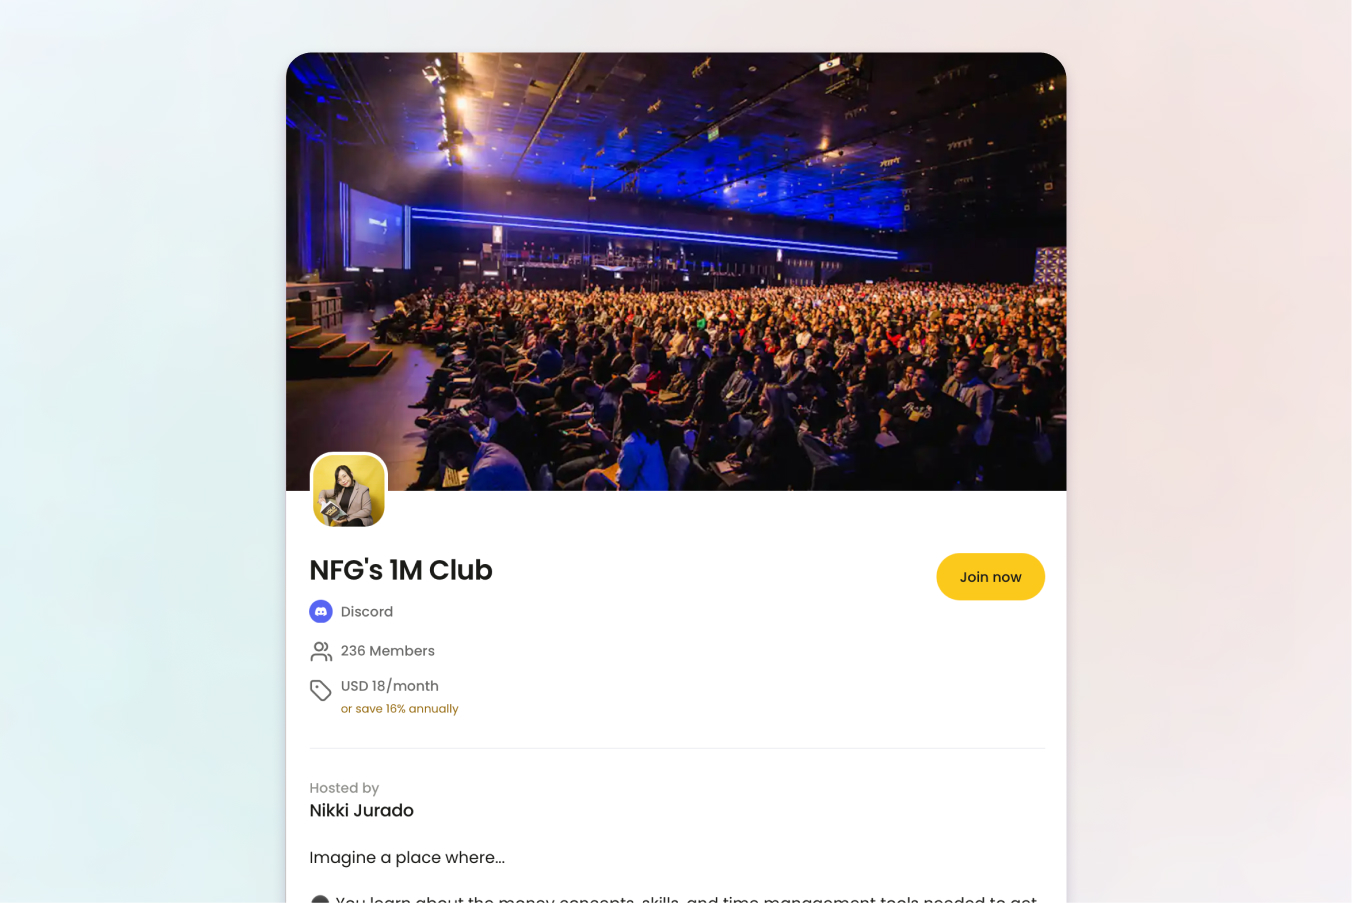 NGF online community landing page on Nas.io